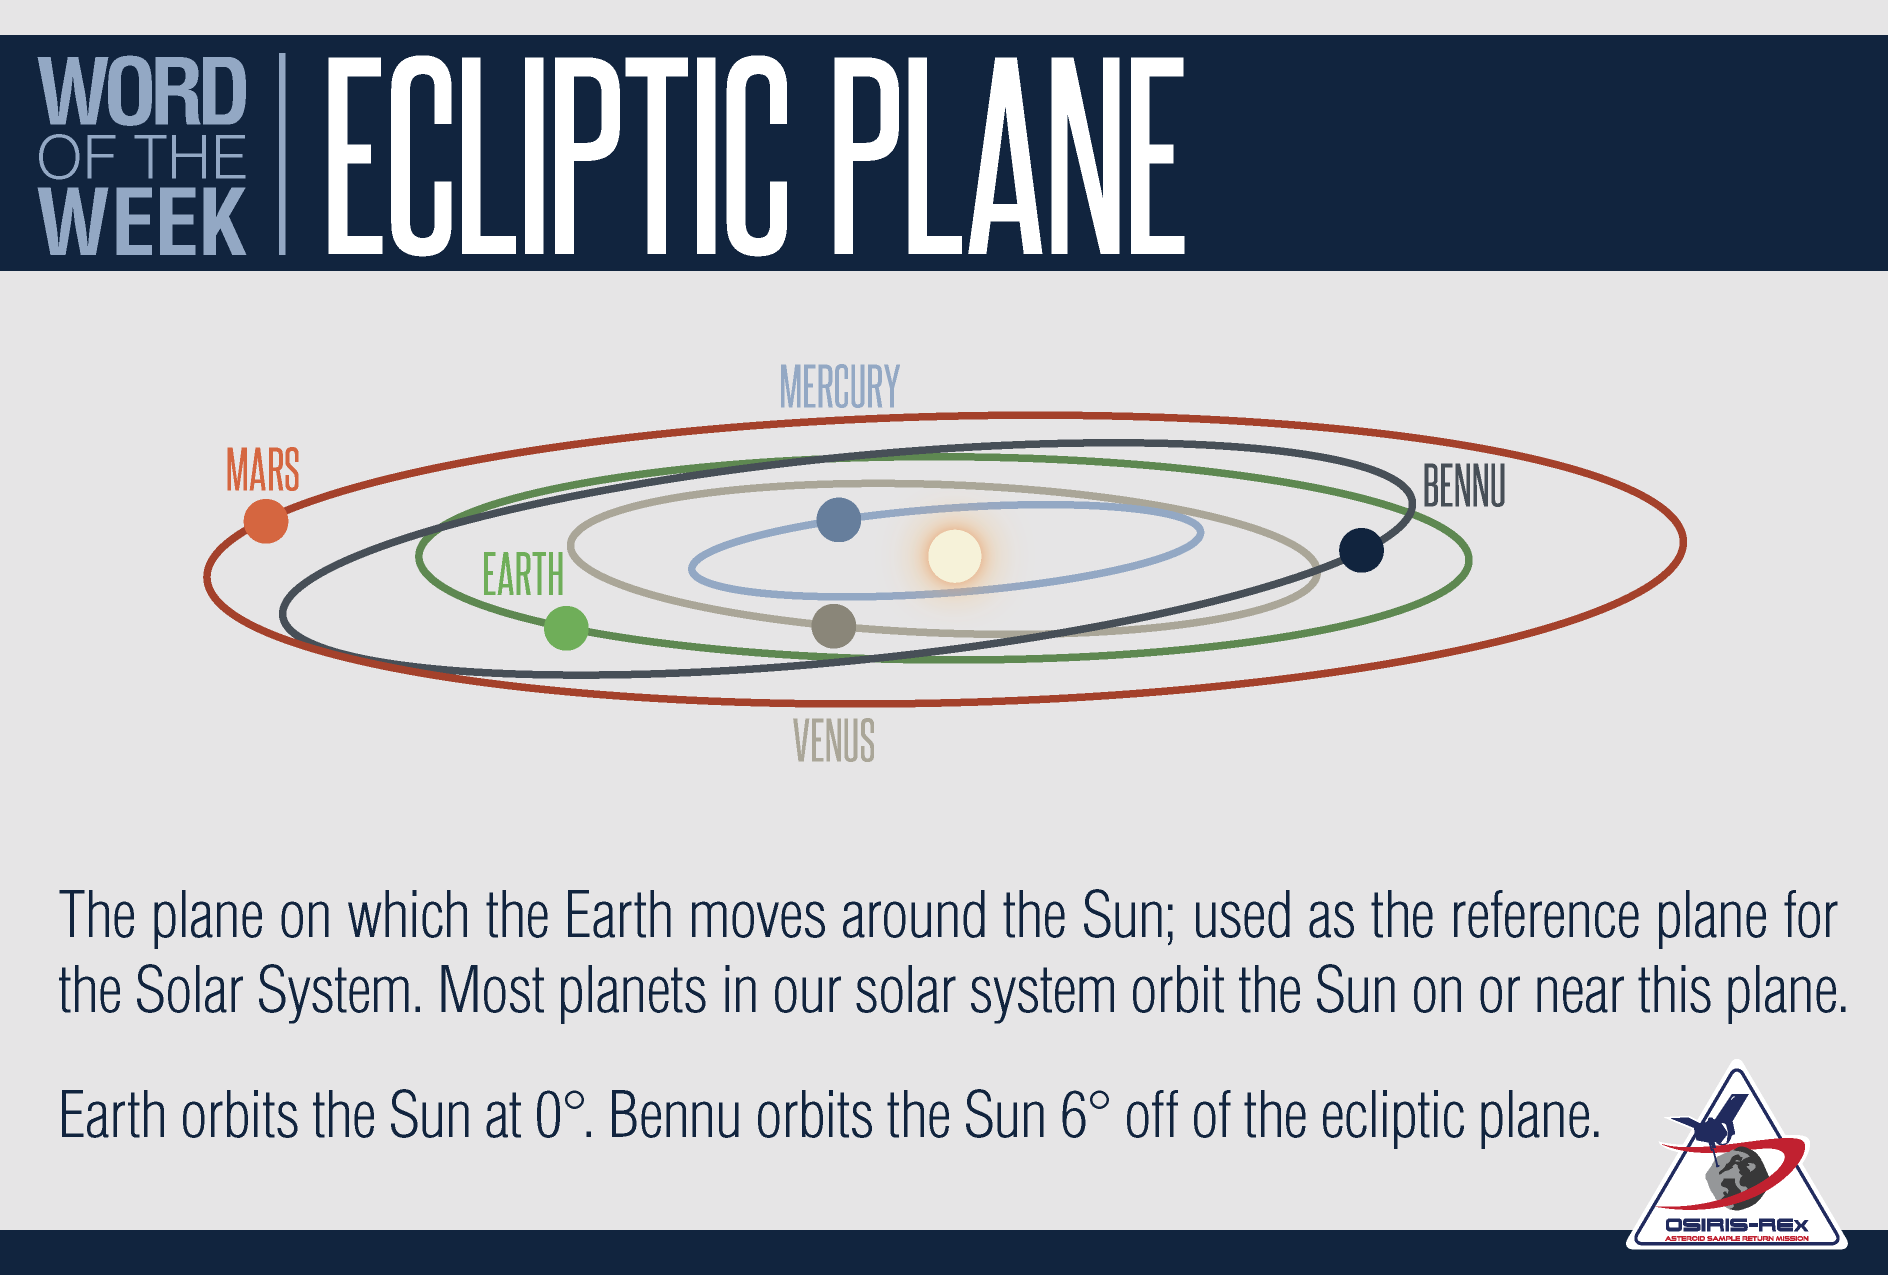 The plane on which the Earth moves around the Sun; used as a reference plane for the Solar System. Most planets in our solar system orbit the Sun on or near this plane. Earth orbits the Sun at 0 degrees. Credit: University of Arizona